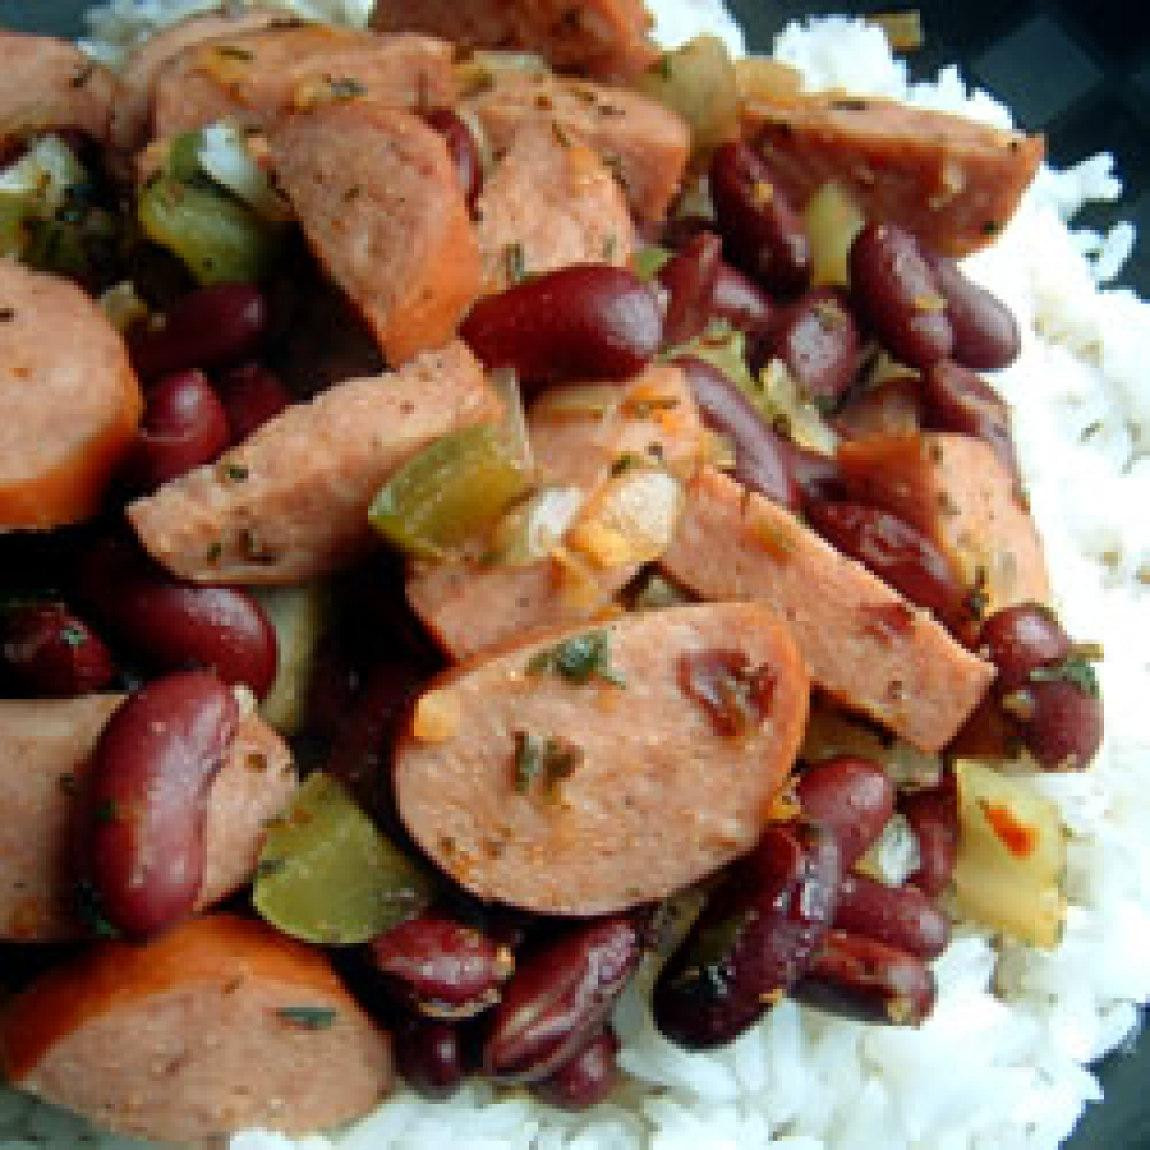 Authentic Red Beans And Rice
 Authentic Louisiana Red Beans and Rice Recipe